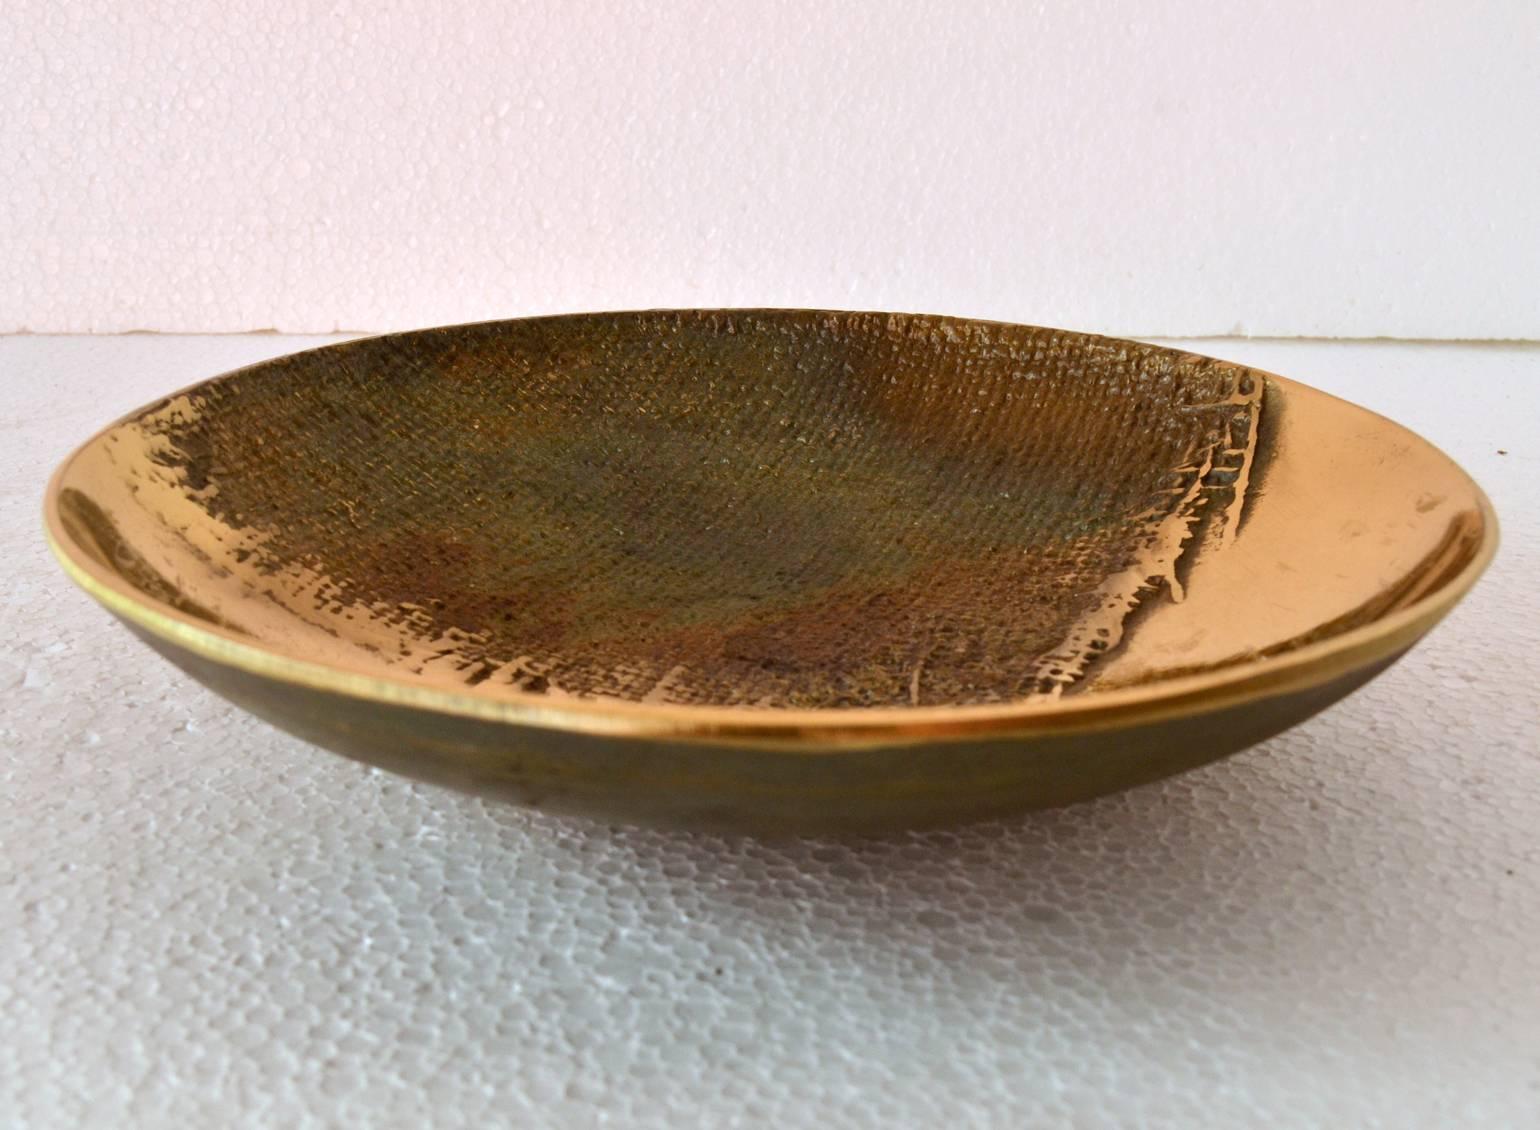 Artistic dish or bowl with the texture of burlap imprinted in part of the dish contrasted with a high polished sheen. The plate is part of a group of high quality cast items we present signed by Antonella Caprio Saviato made in the 1970s.